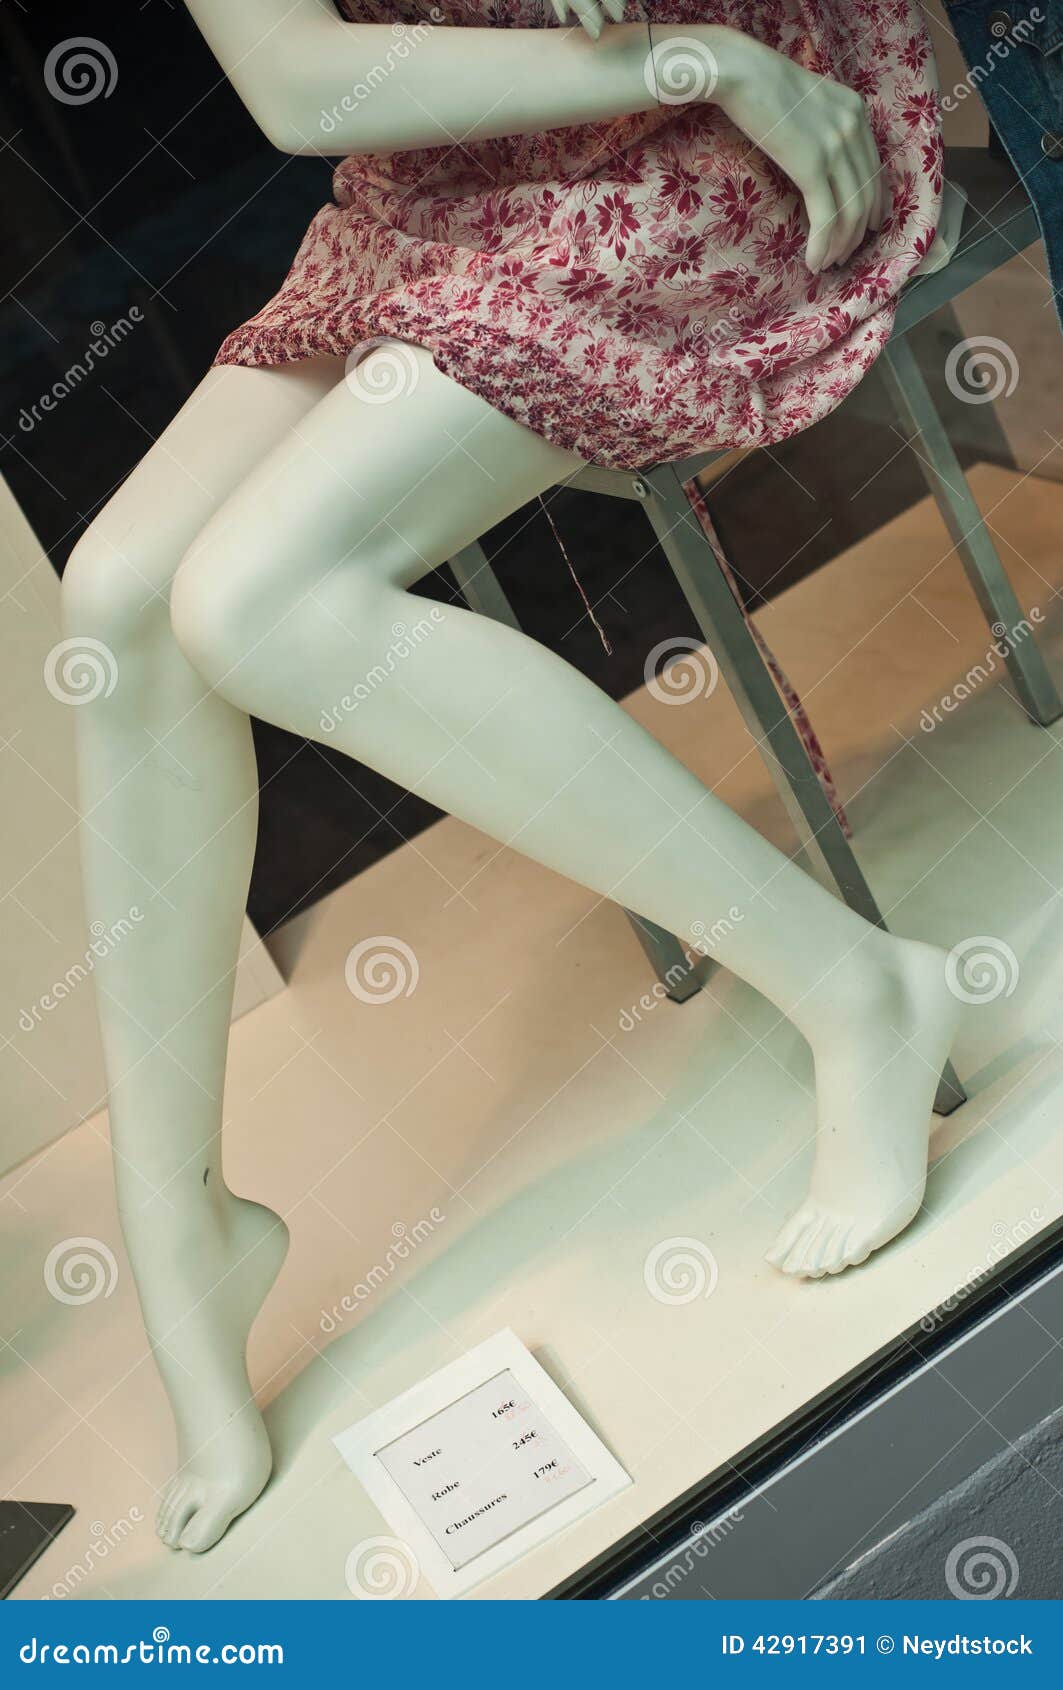 Legs and red dress. Legs closeup mannequin showcase store